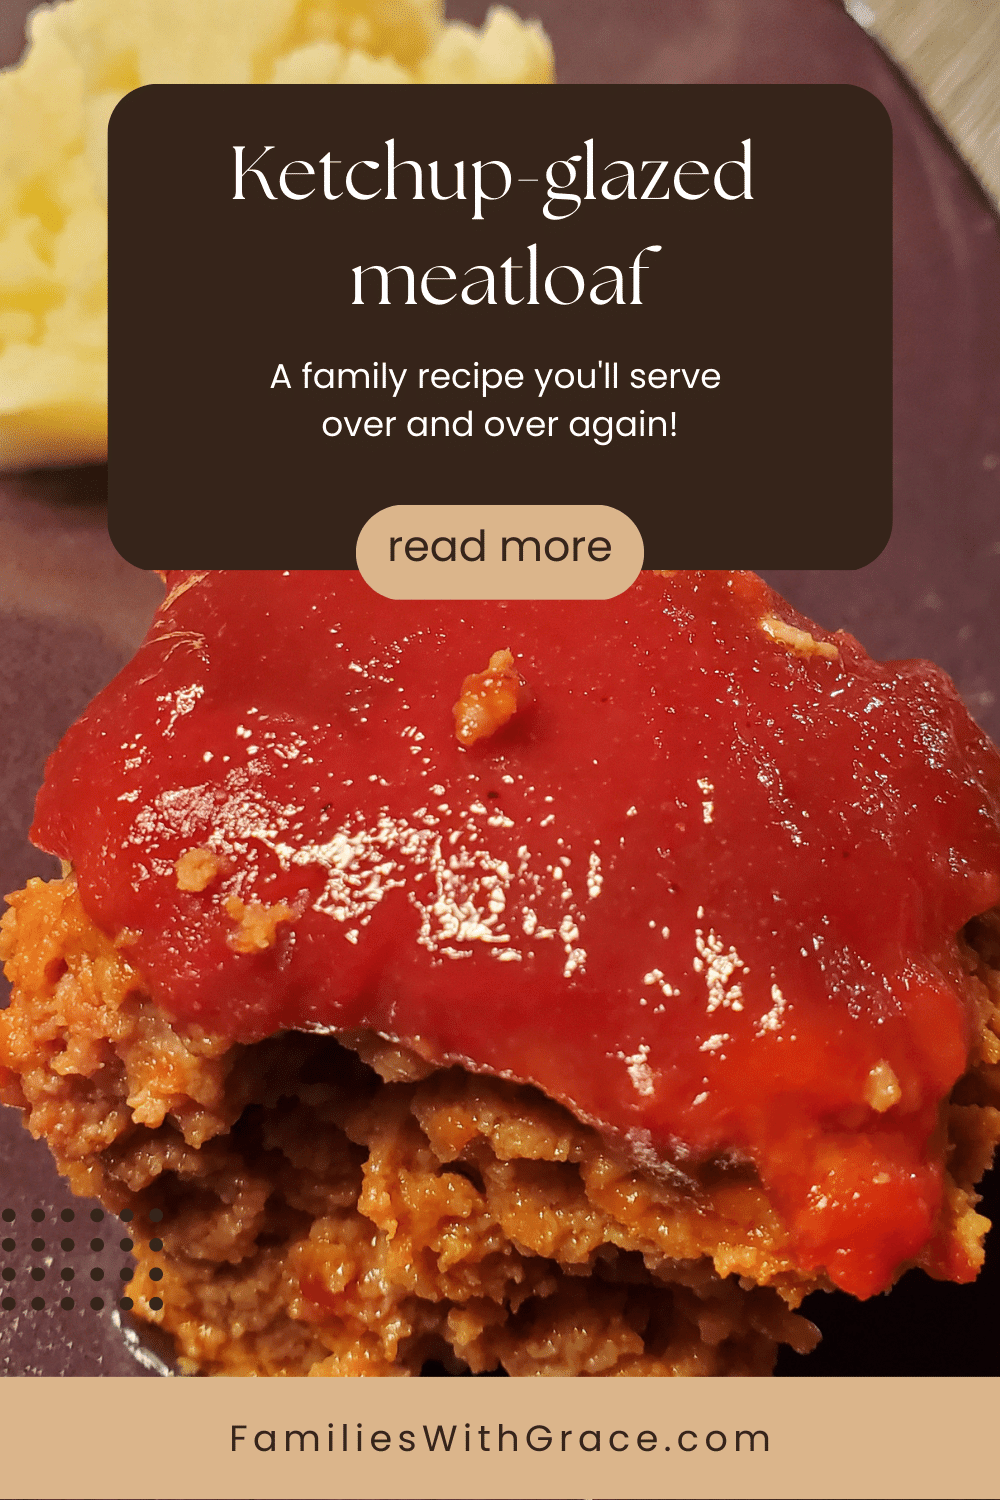 Meatloaf recipe with ketchup glaze